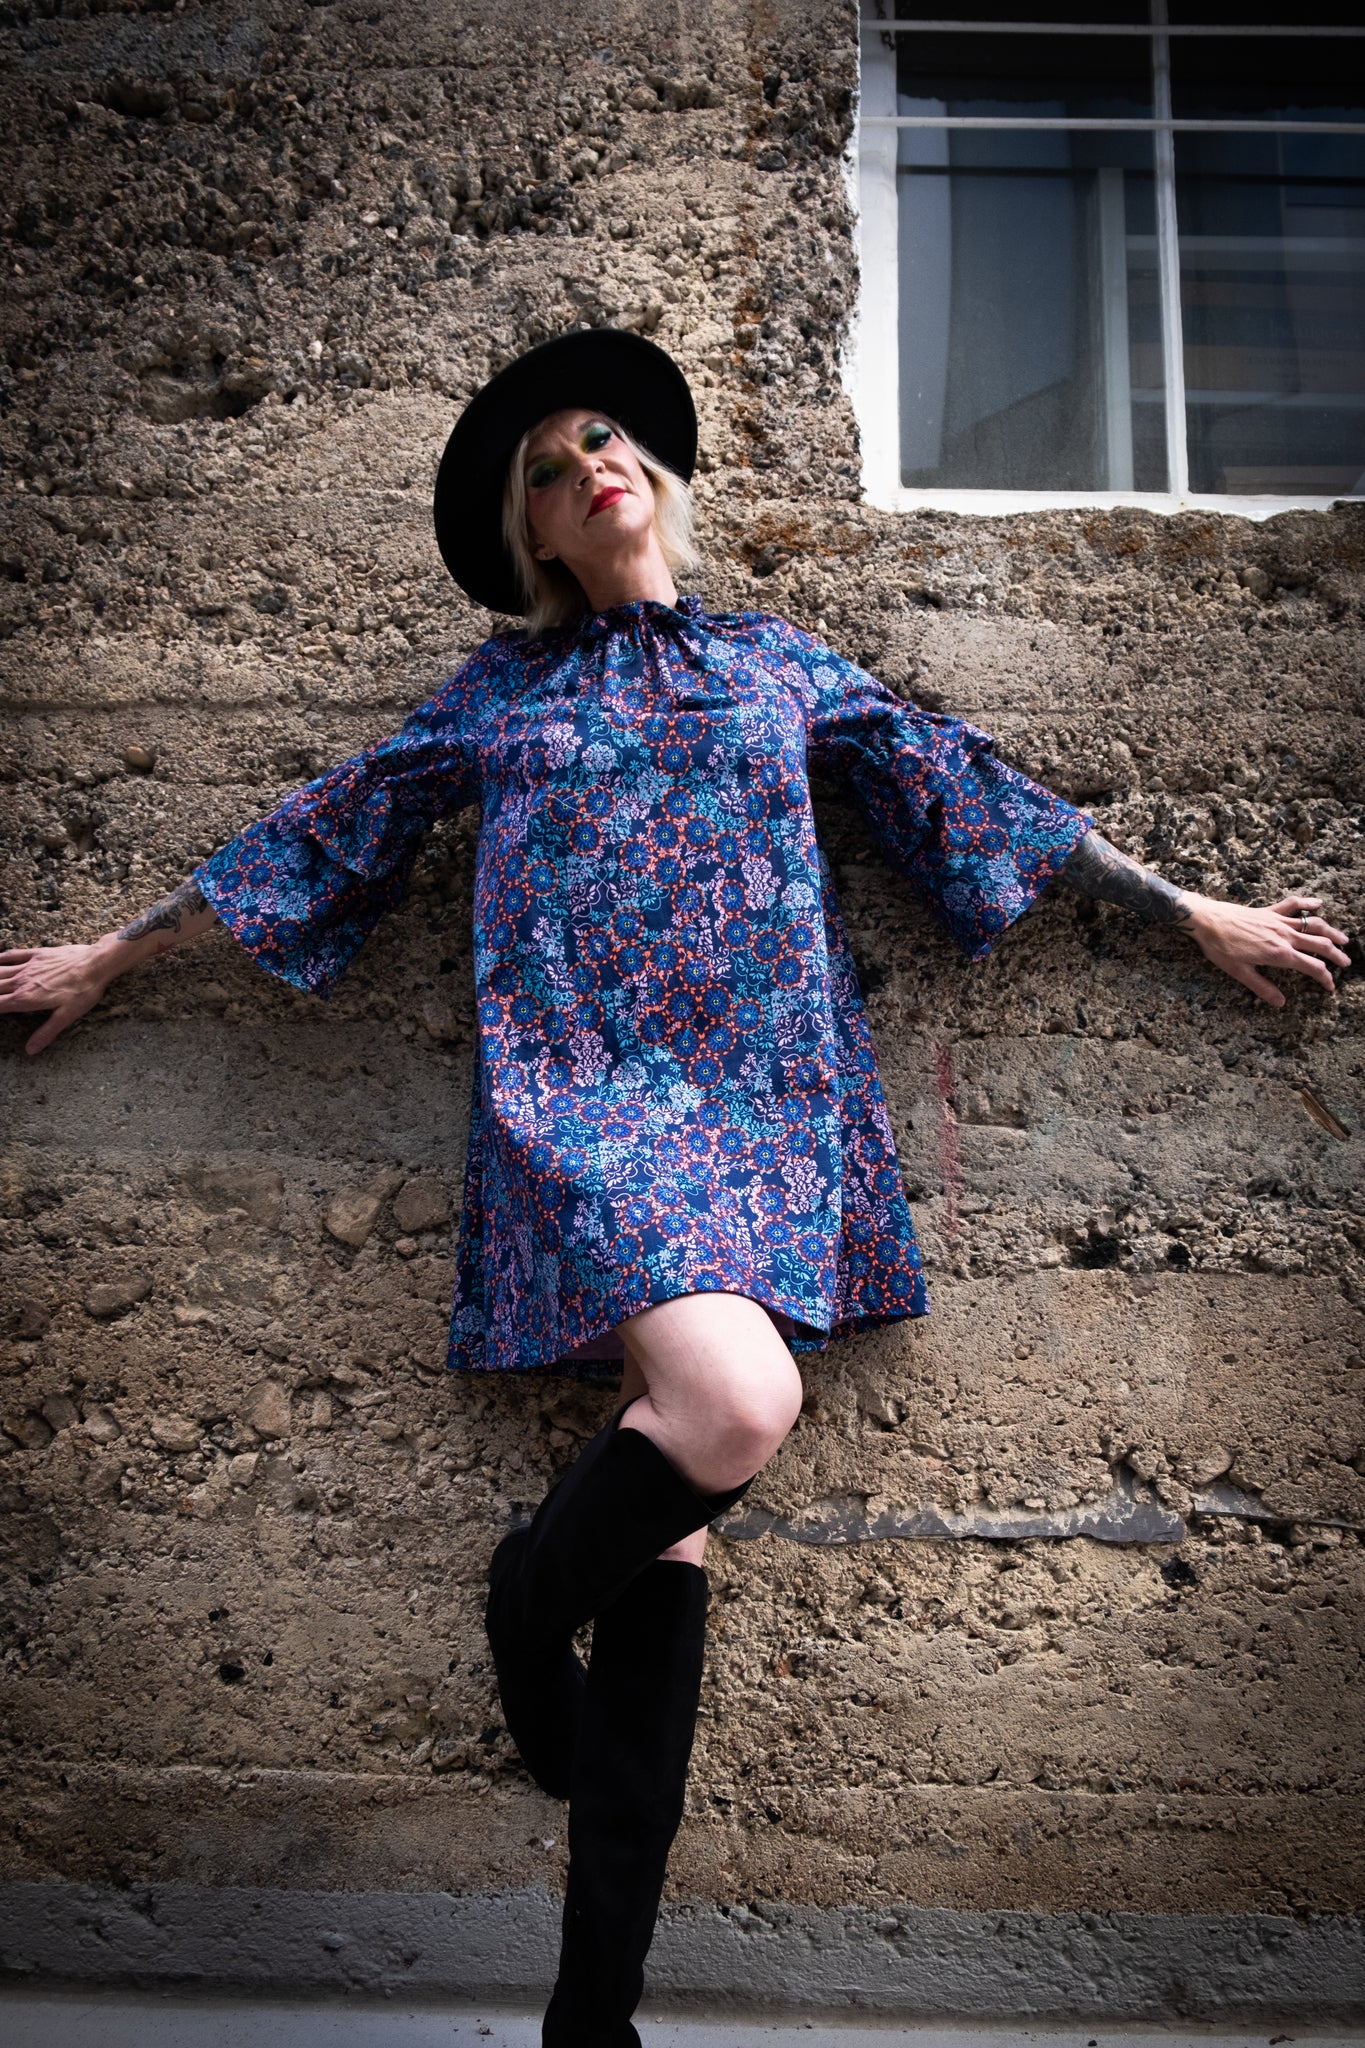 A model leaning against a wall with spread arms wearing a blue and pink dress, a black hat, and black knee-high boots. 